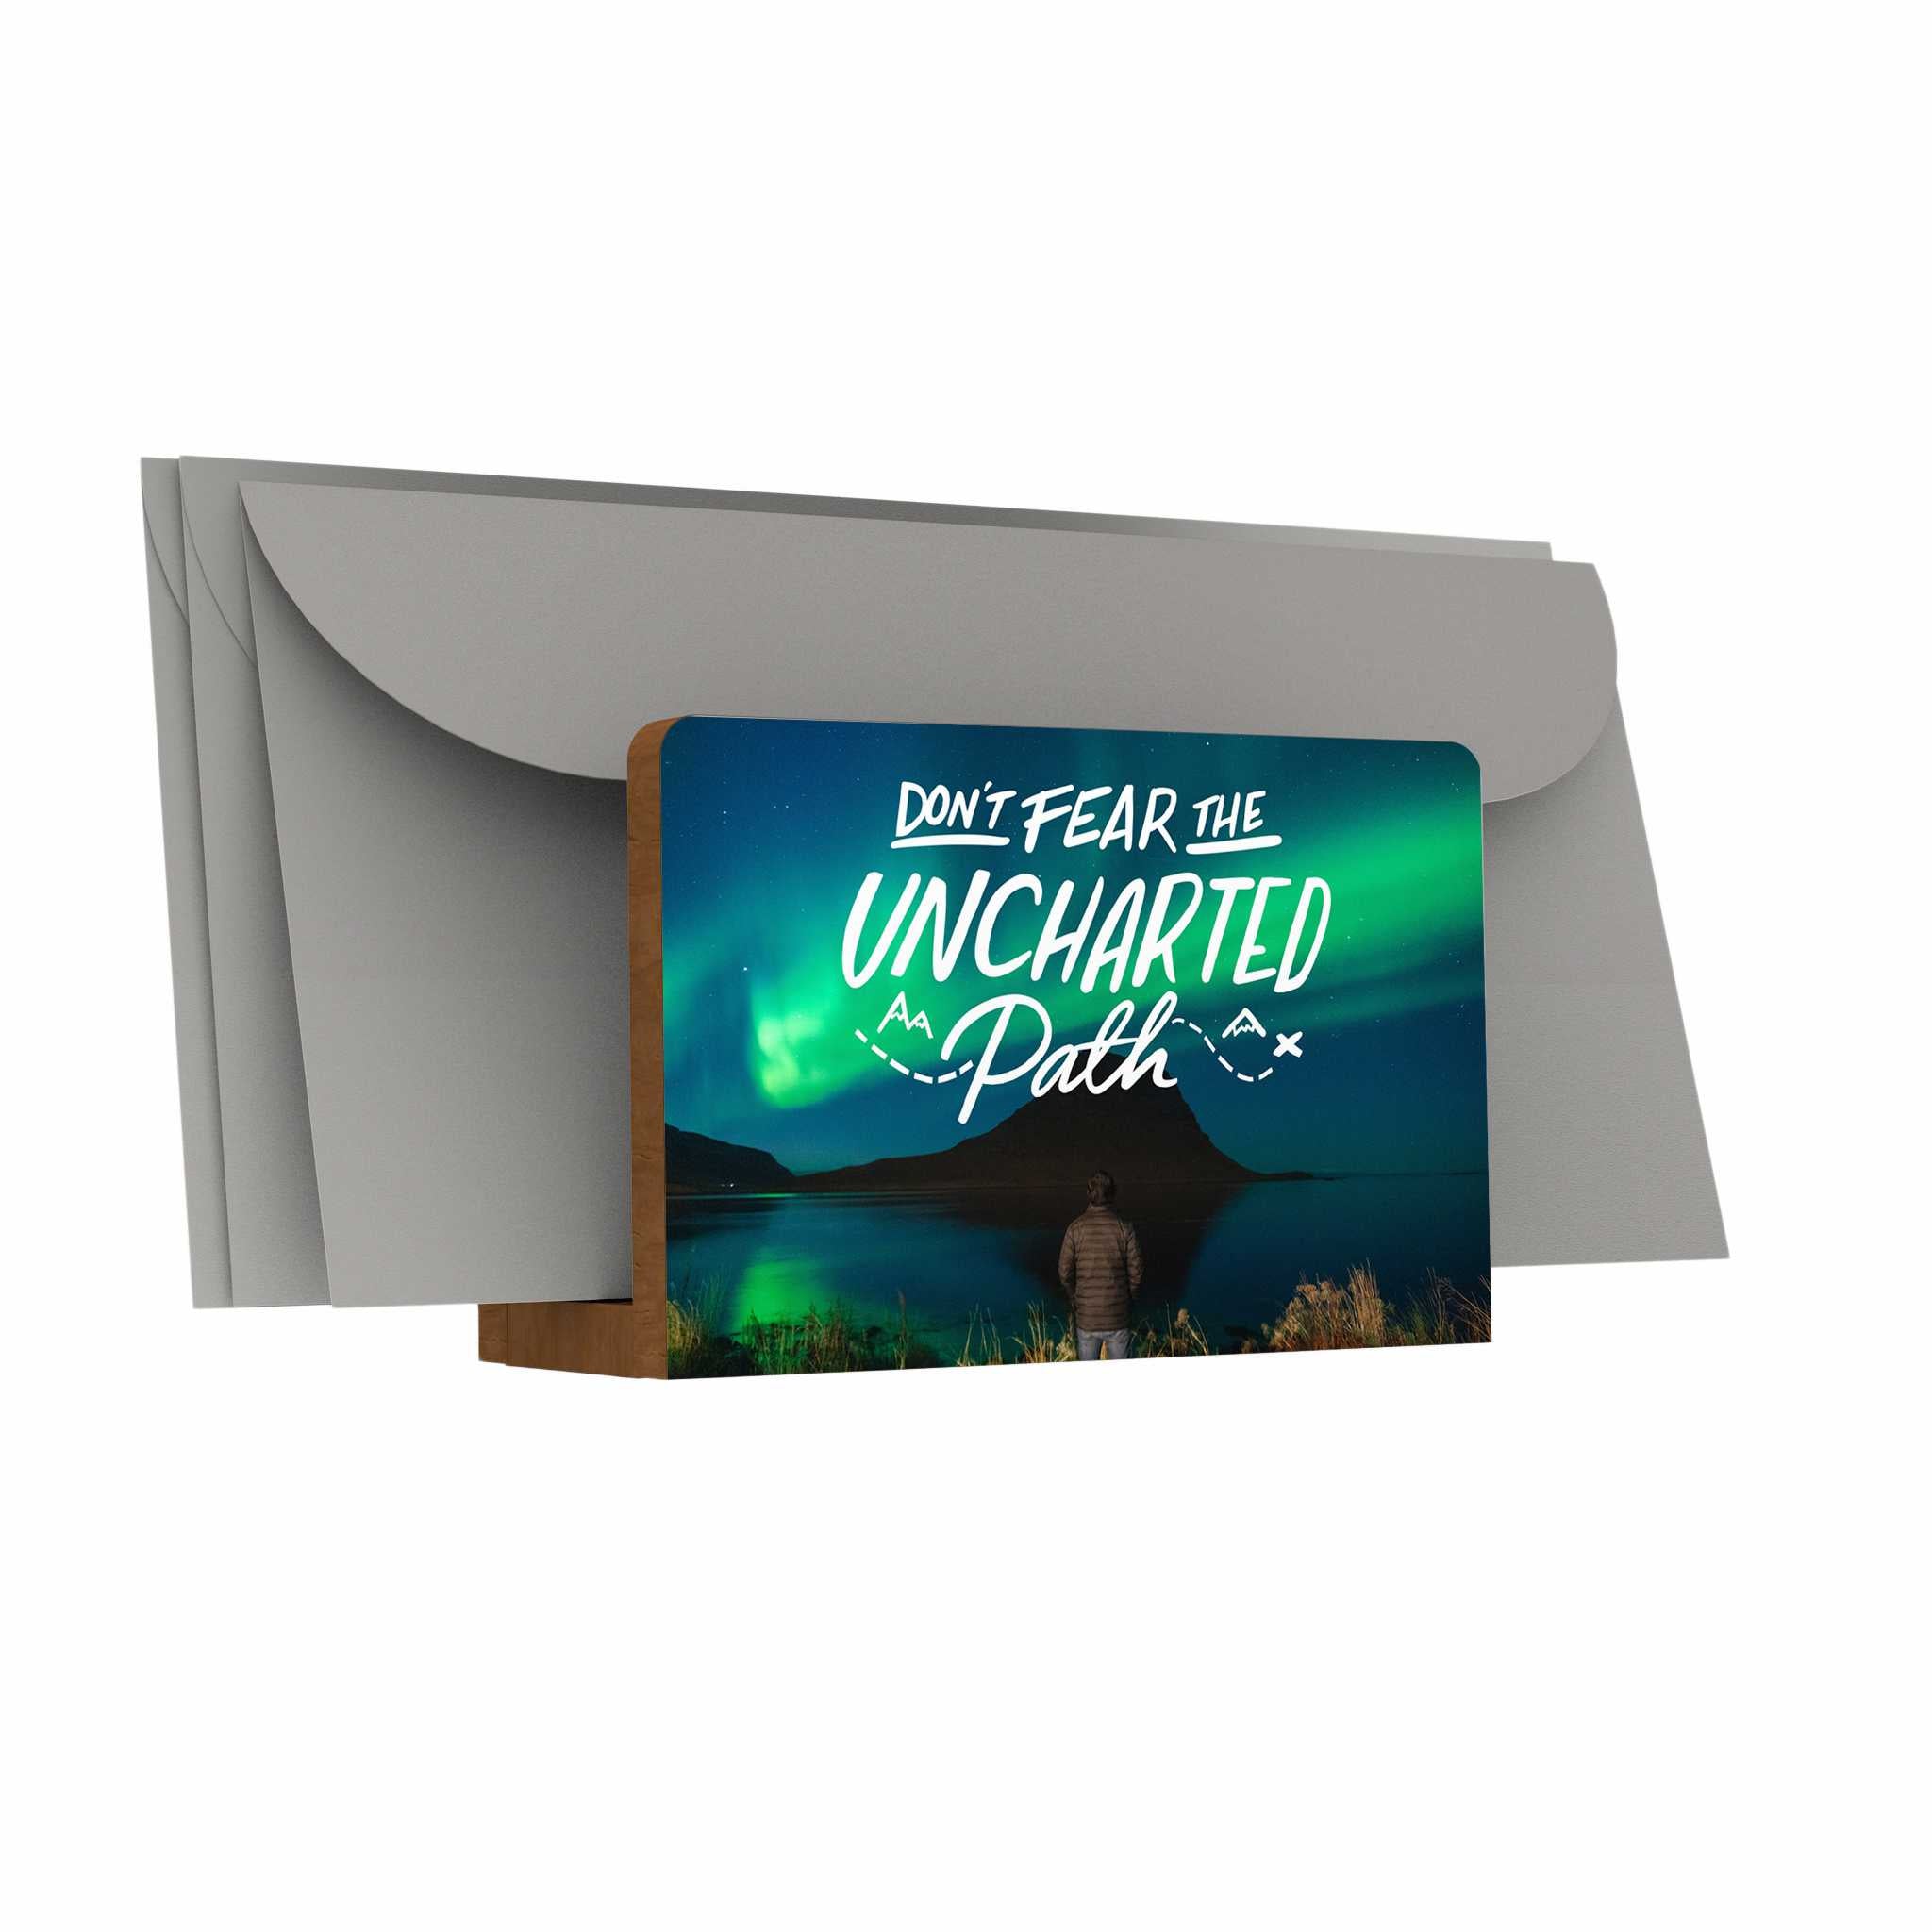 Grand Adventure Letter Holder: Don't Fear the Uncharted Path